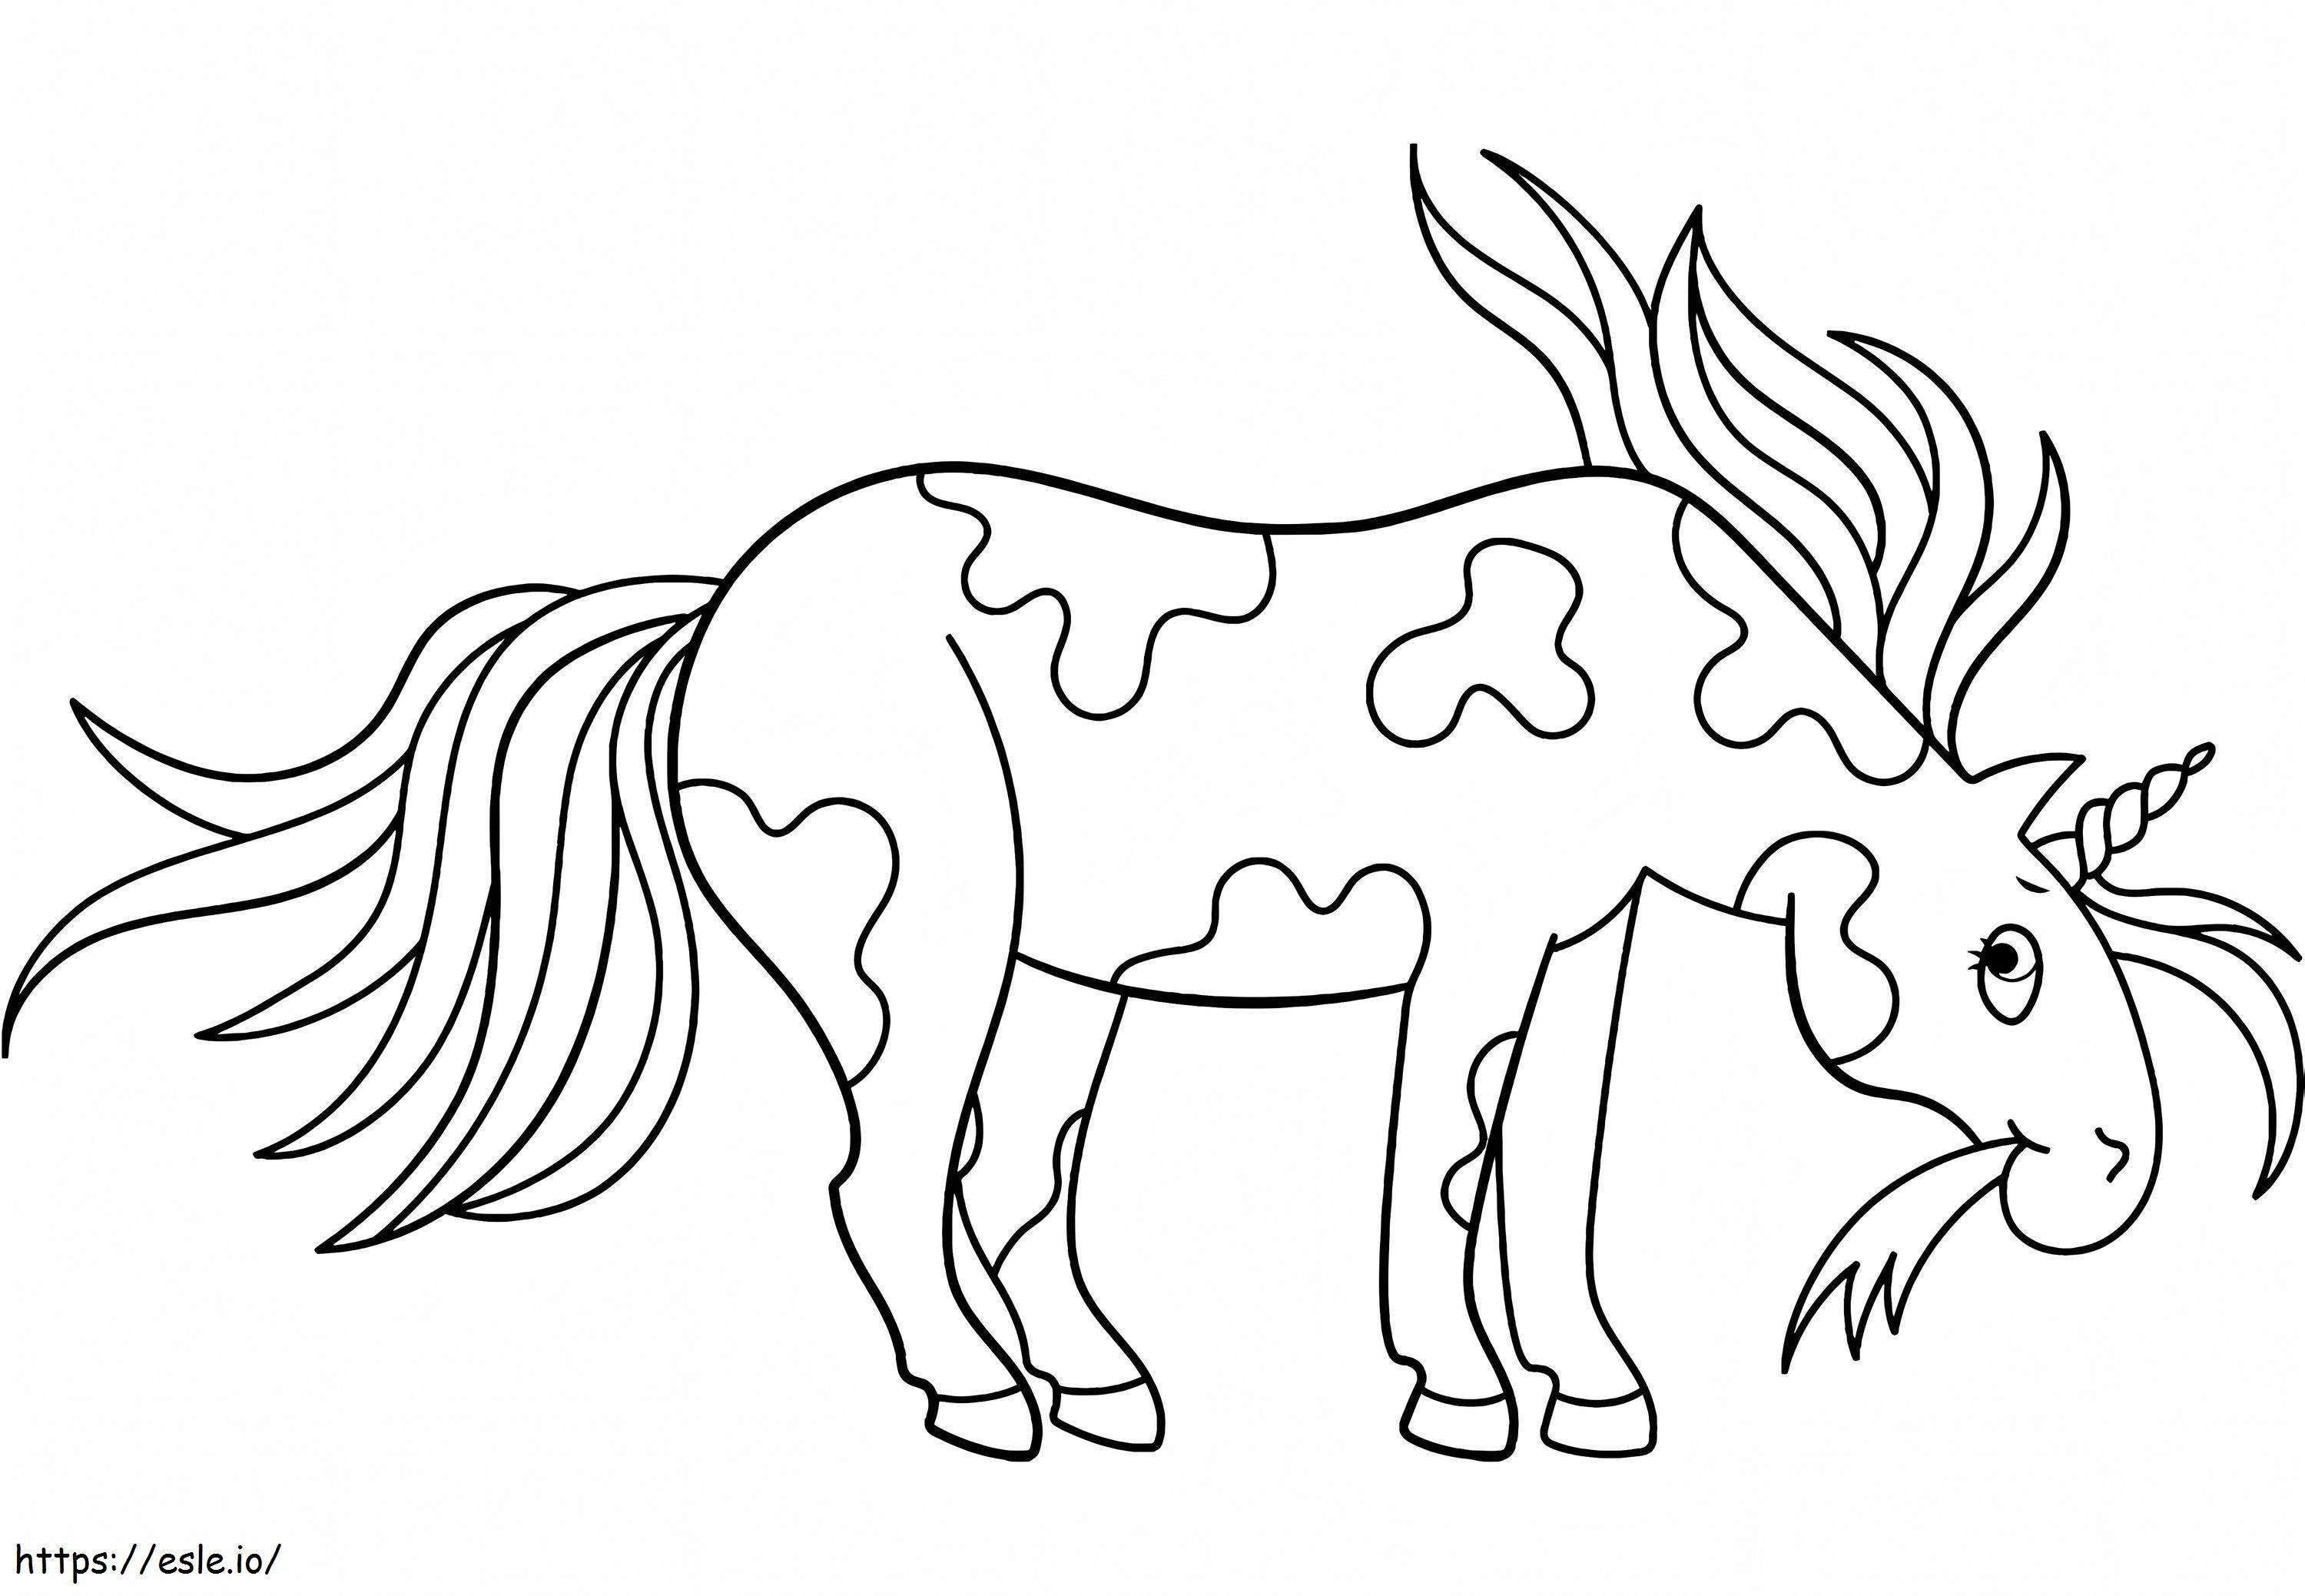 Unicorn Eating Grass coloring page